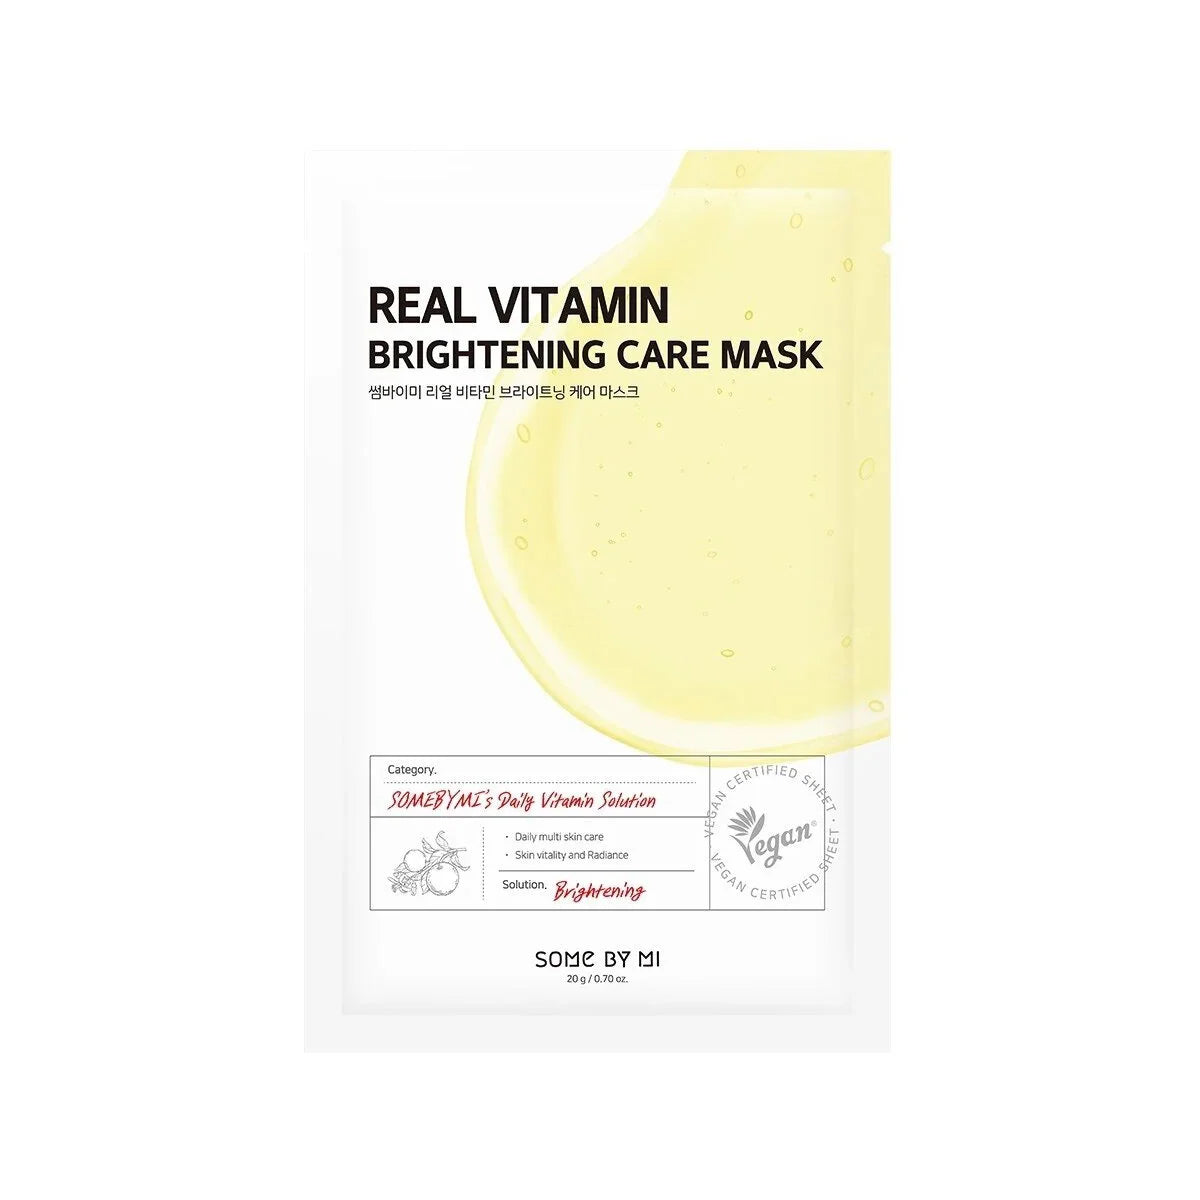 Some By Mi Real Vitamin Brightening Care Mask best Korean mask for hyperpigmentation dark spots acne scars dry dull uneven skin tone K Beauty World